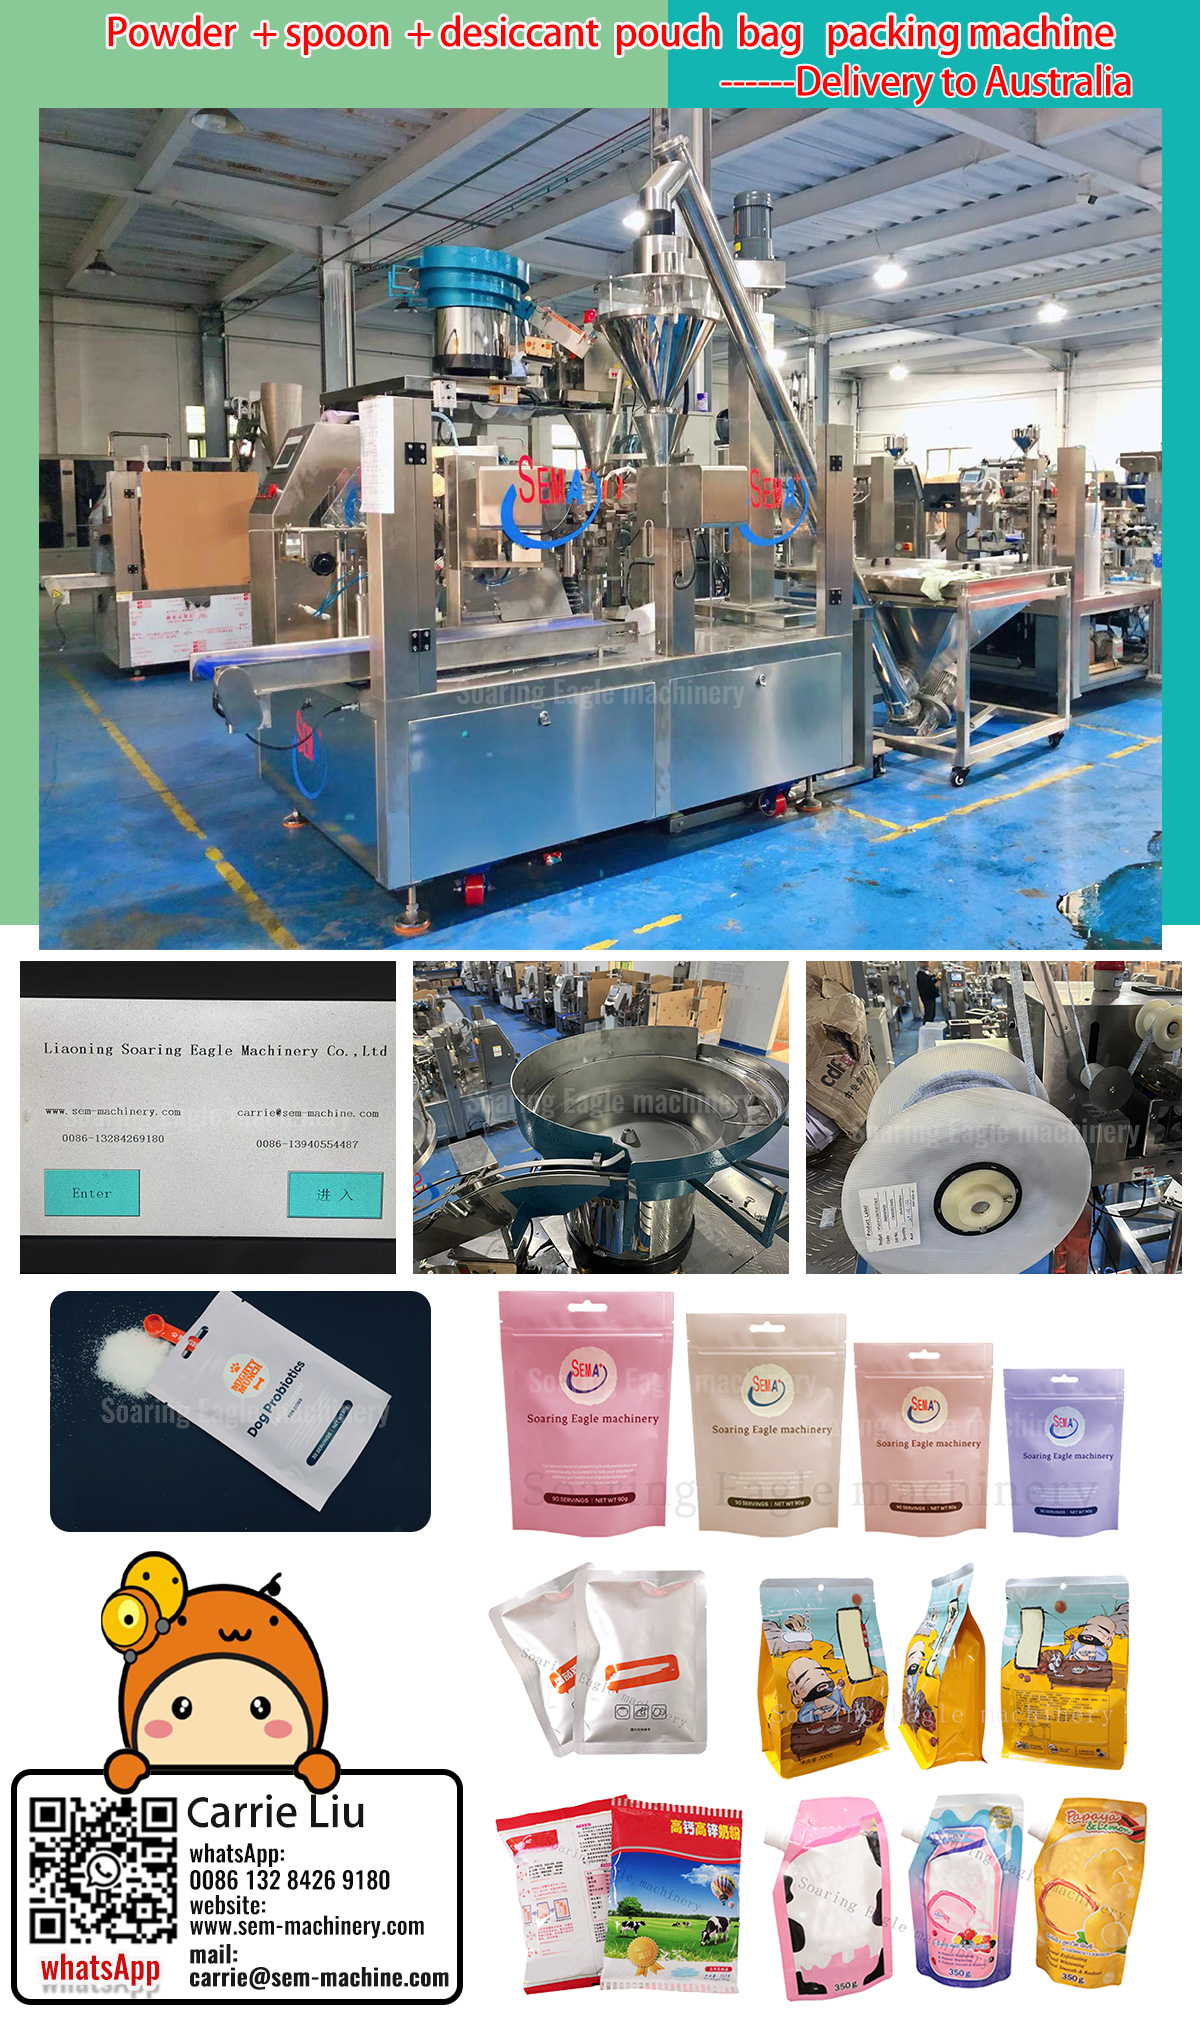 Automatic powder pouch bag sachet packing machine——Deliver to Australia